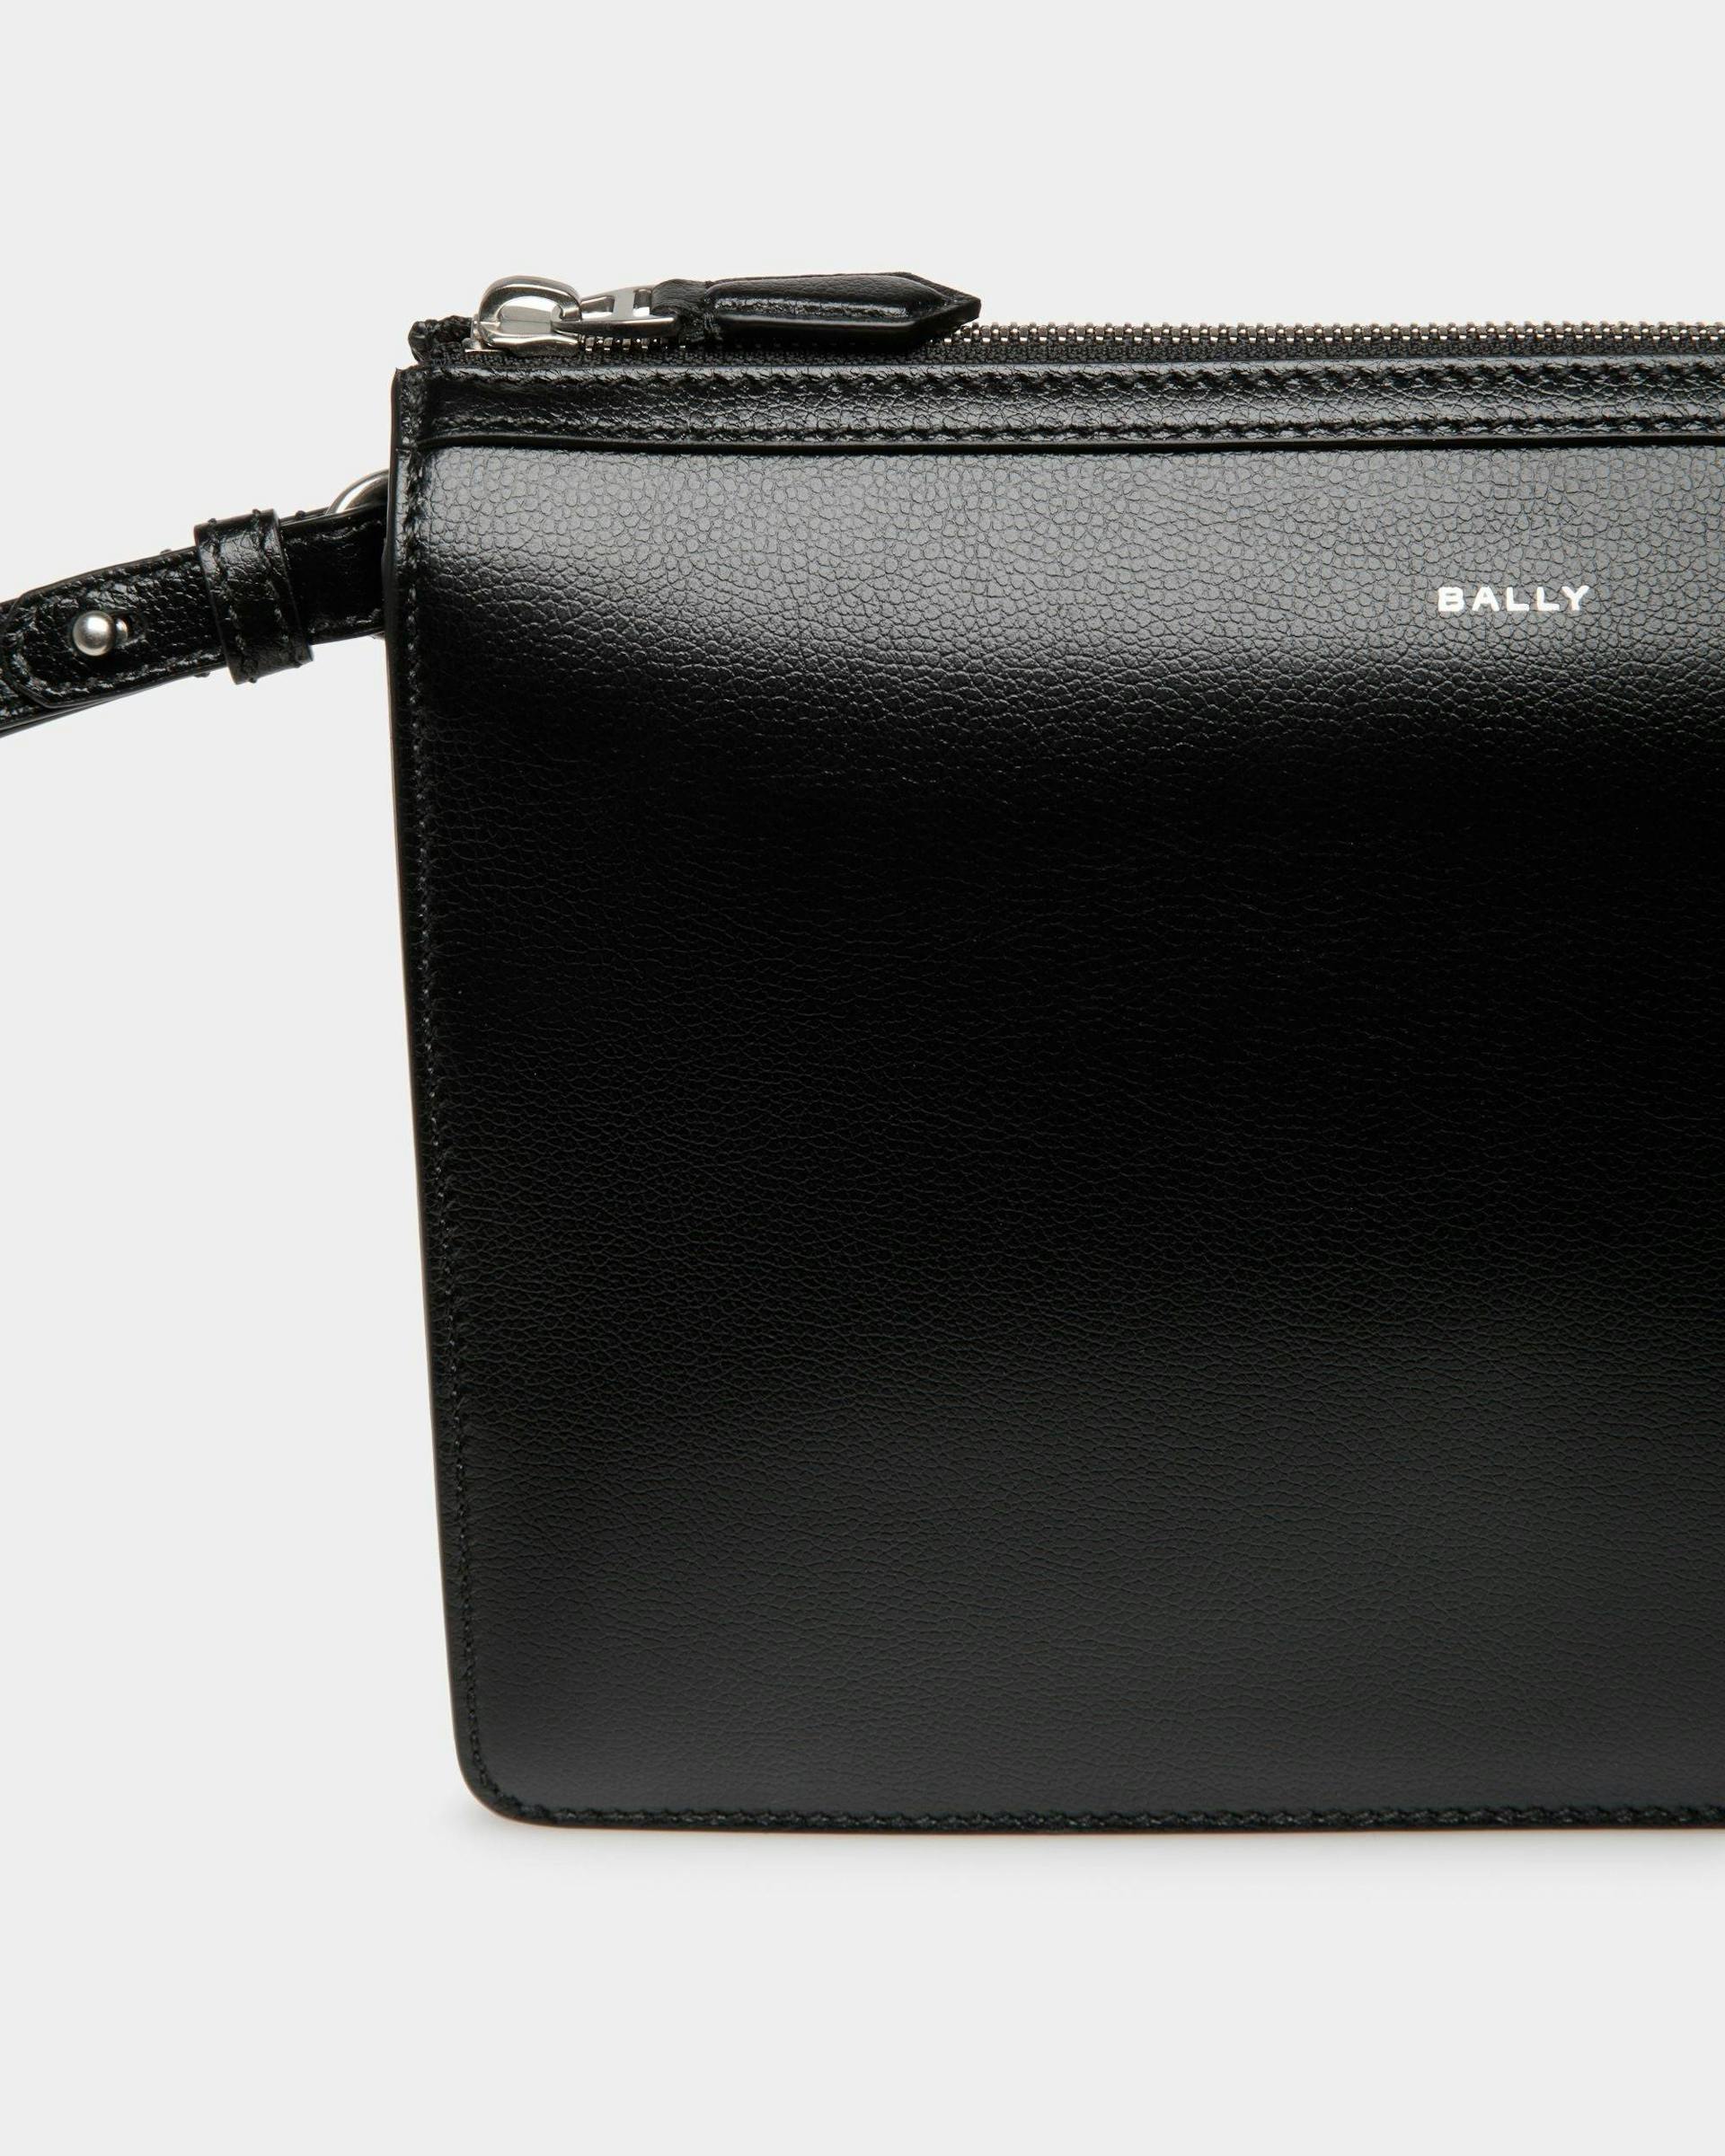 Men's Banque Clutch In Black Leather | Bally | Still Life Detail